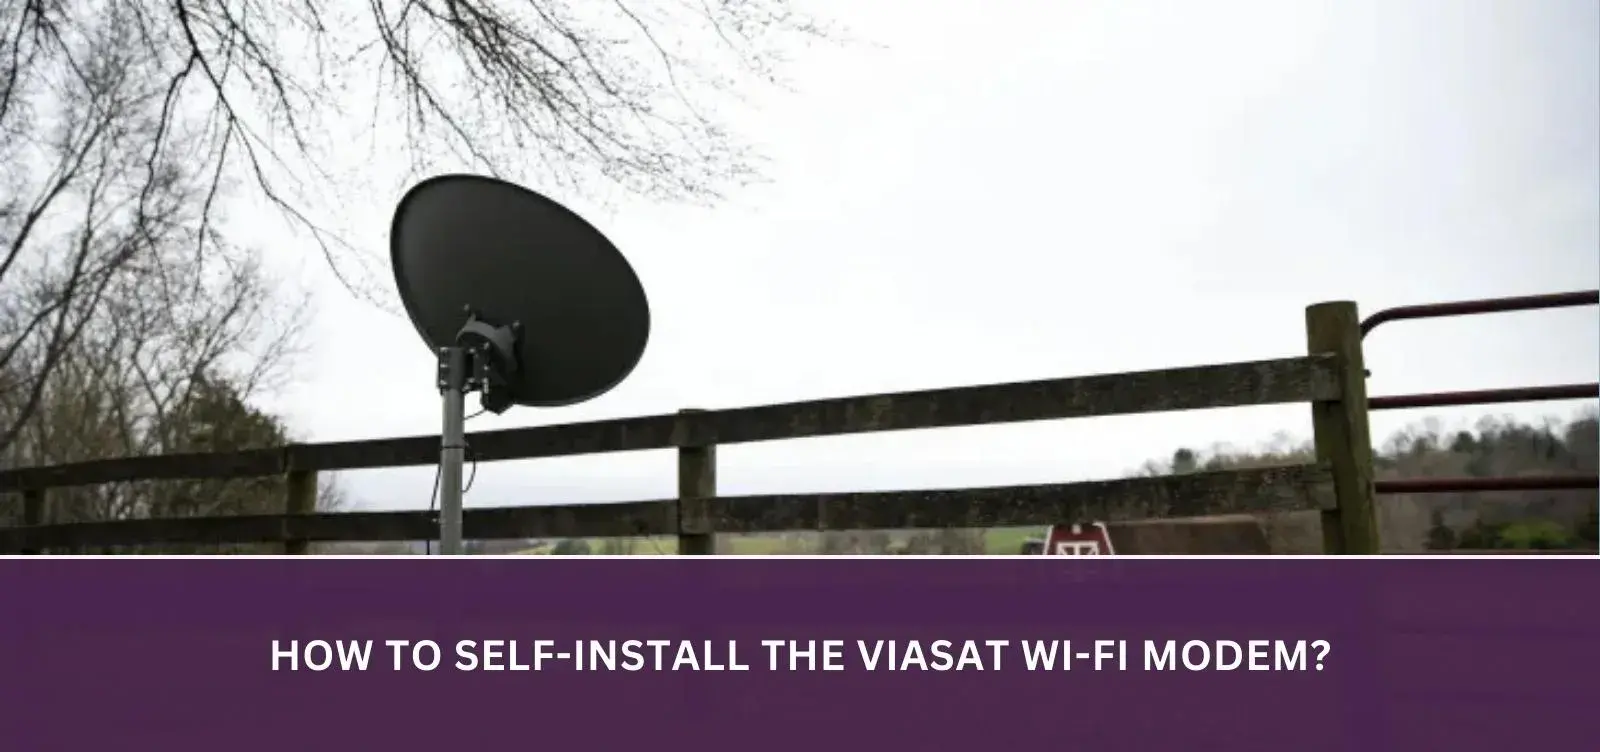 How to self-install the Viasat Wi-Fi Modem?